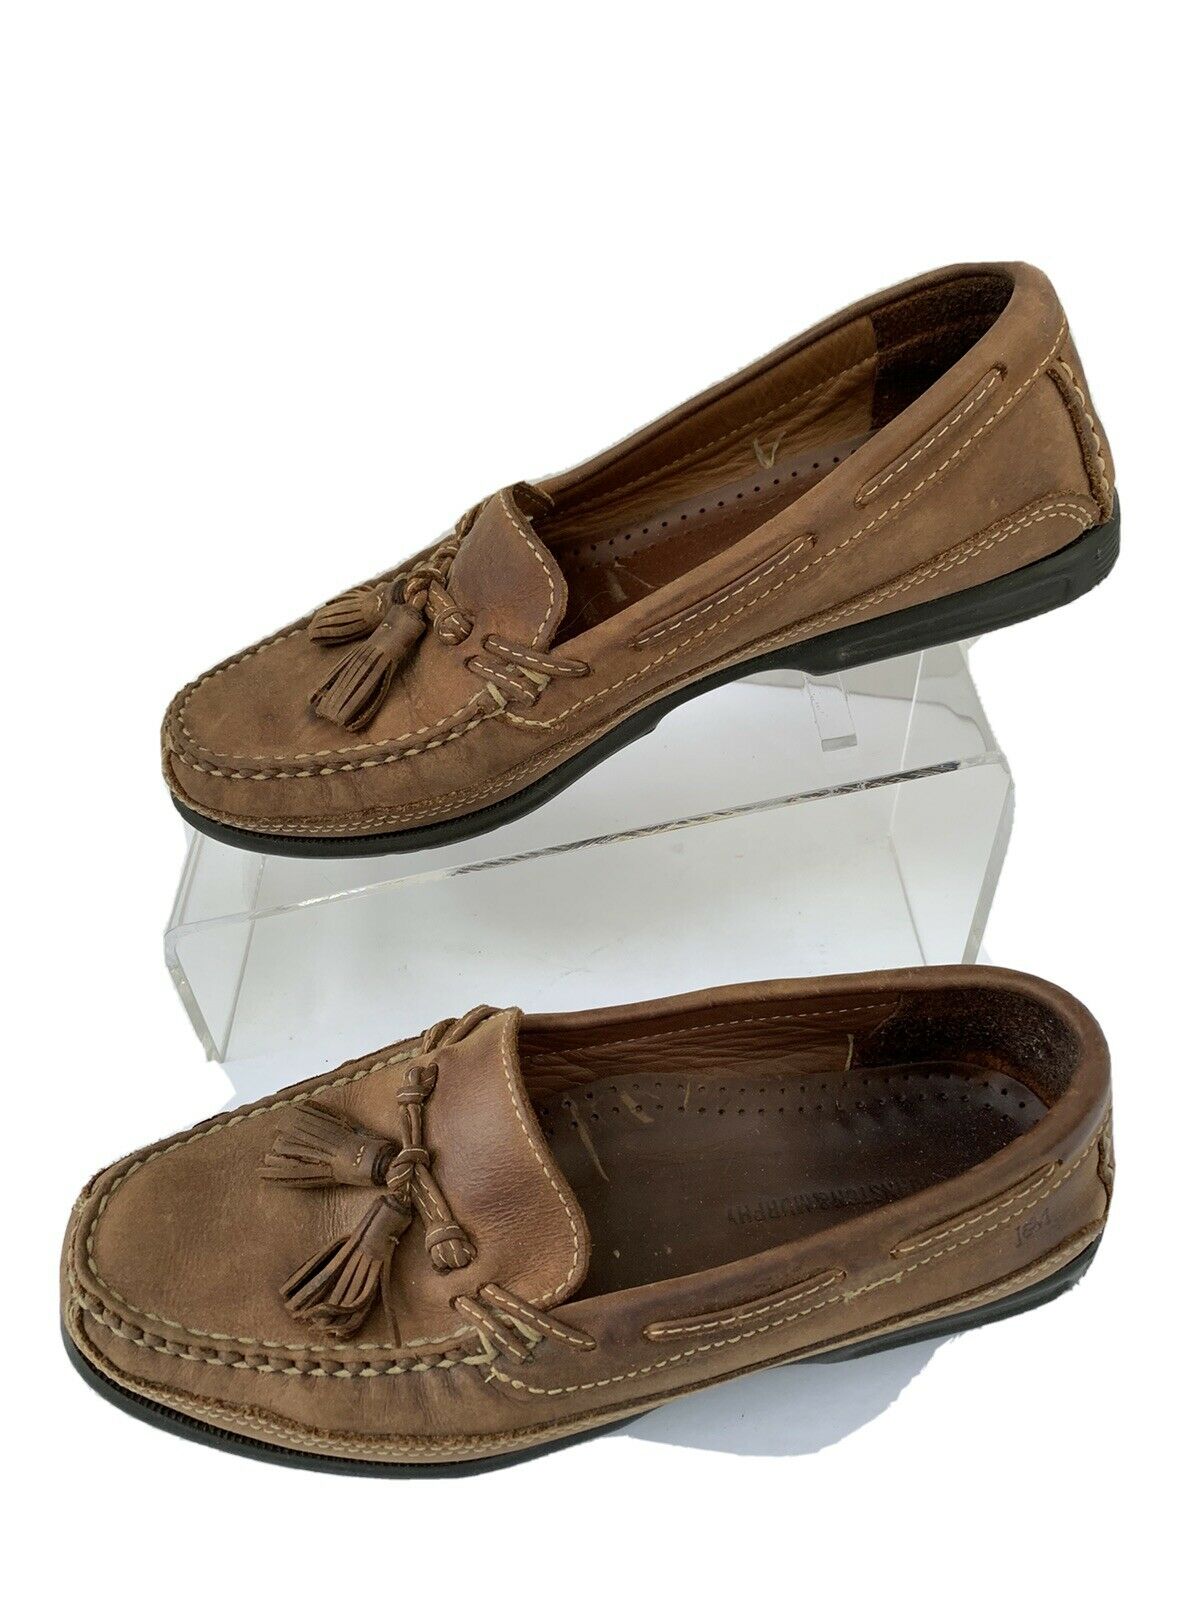 Johnson & Murphy Men's brown Suede Tassel Slip-On Casual Shoes Loafers Size 9 M